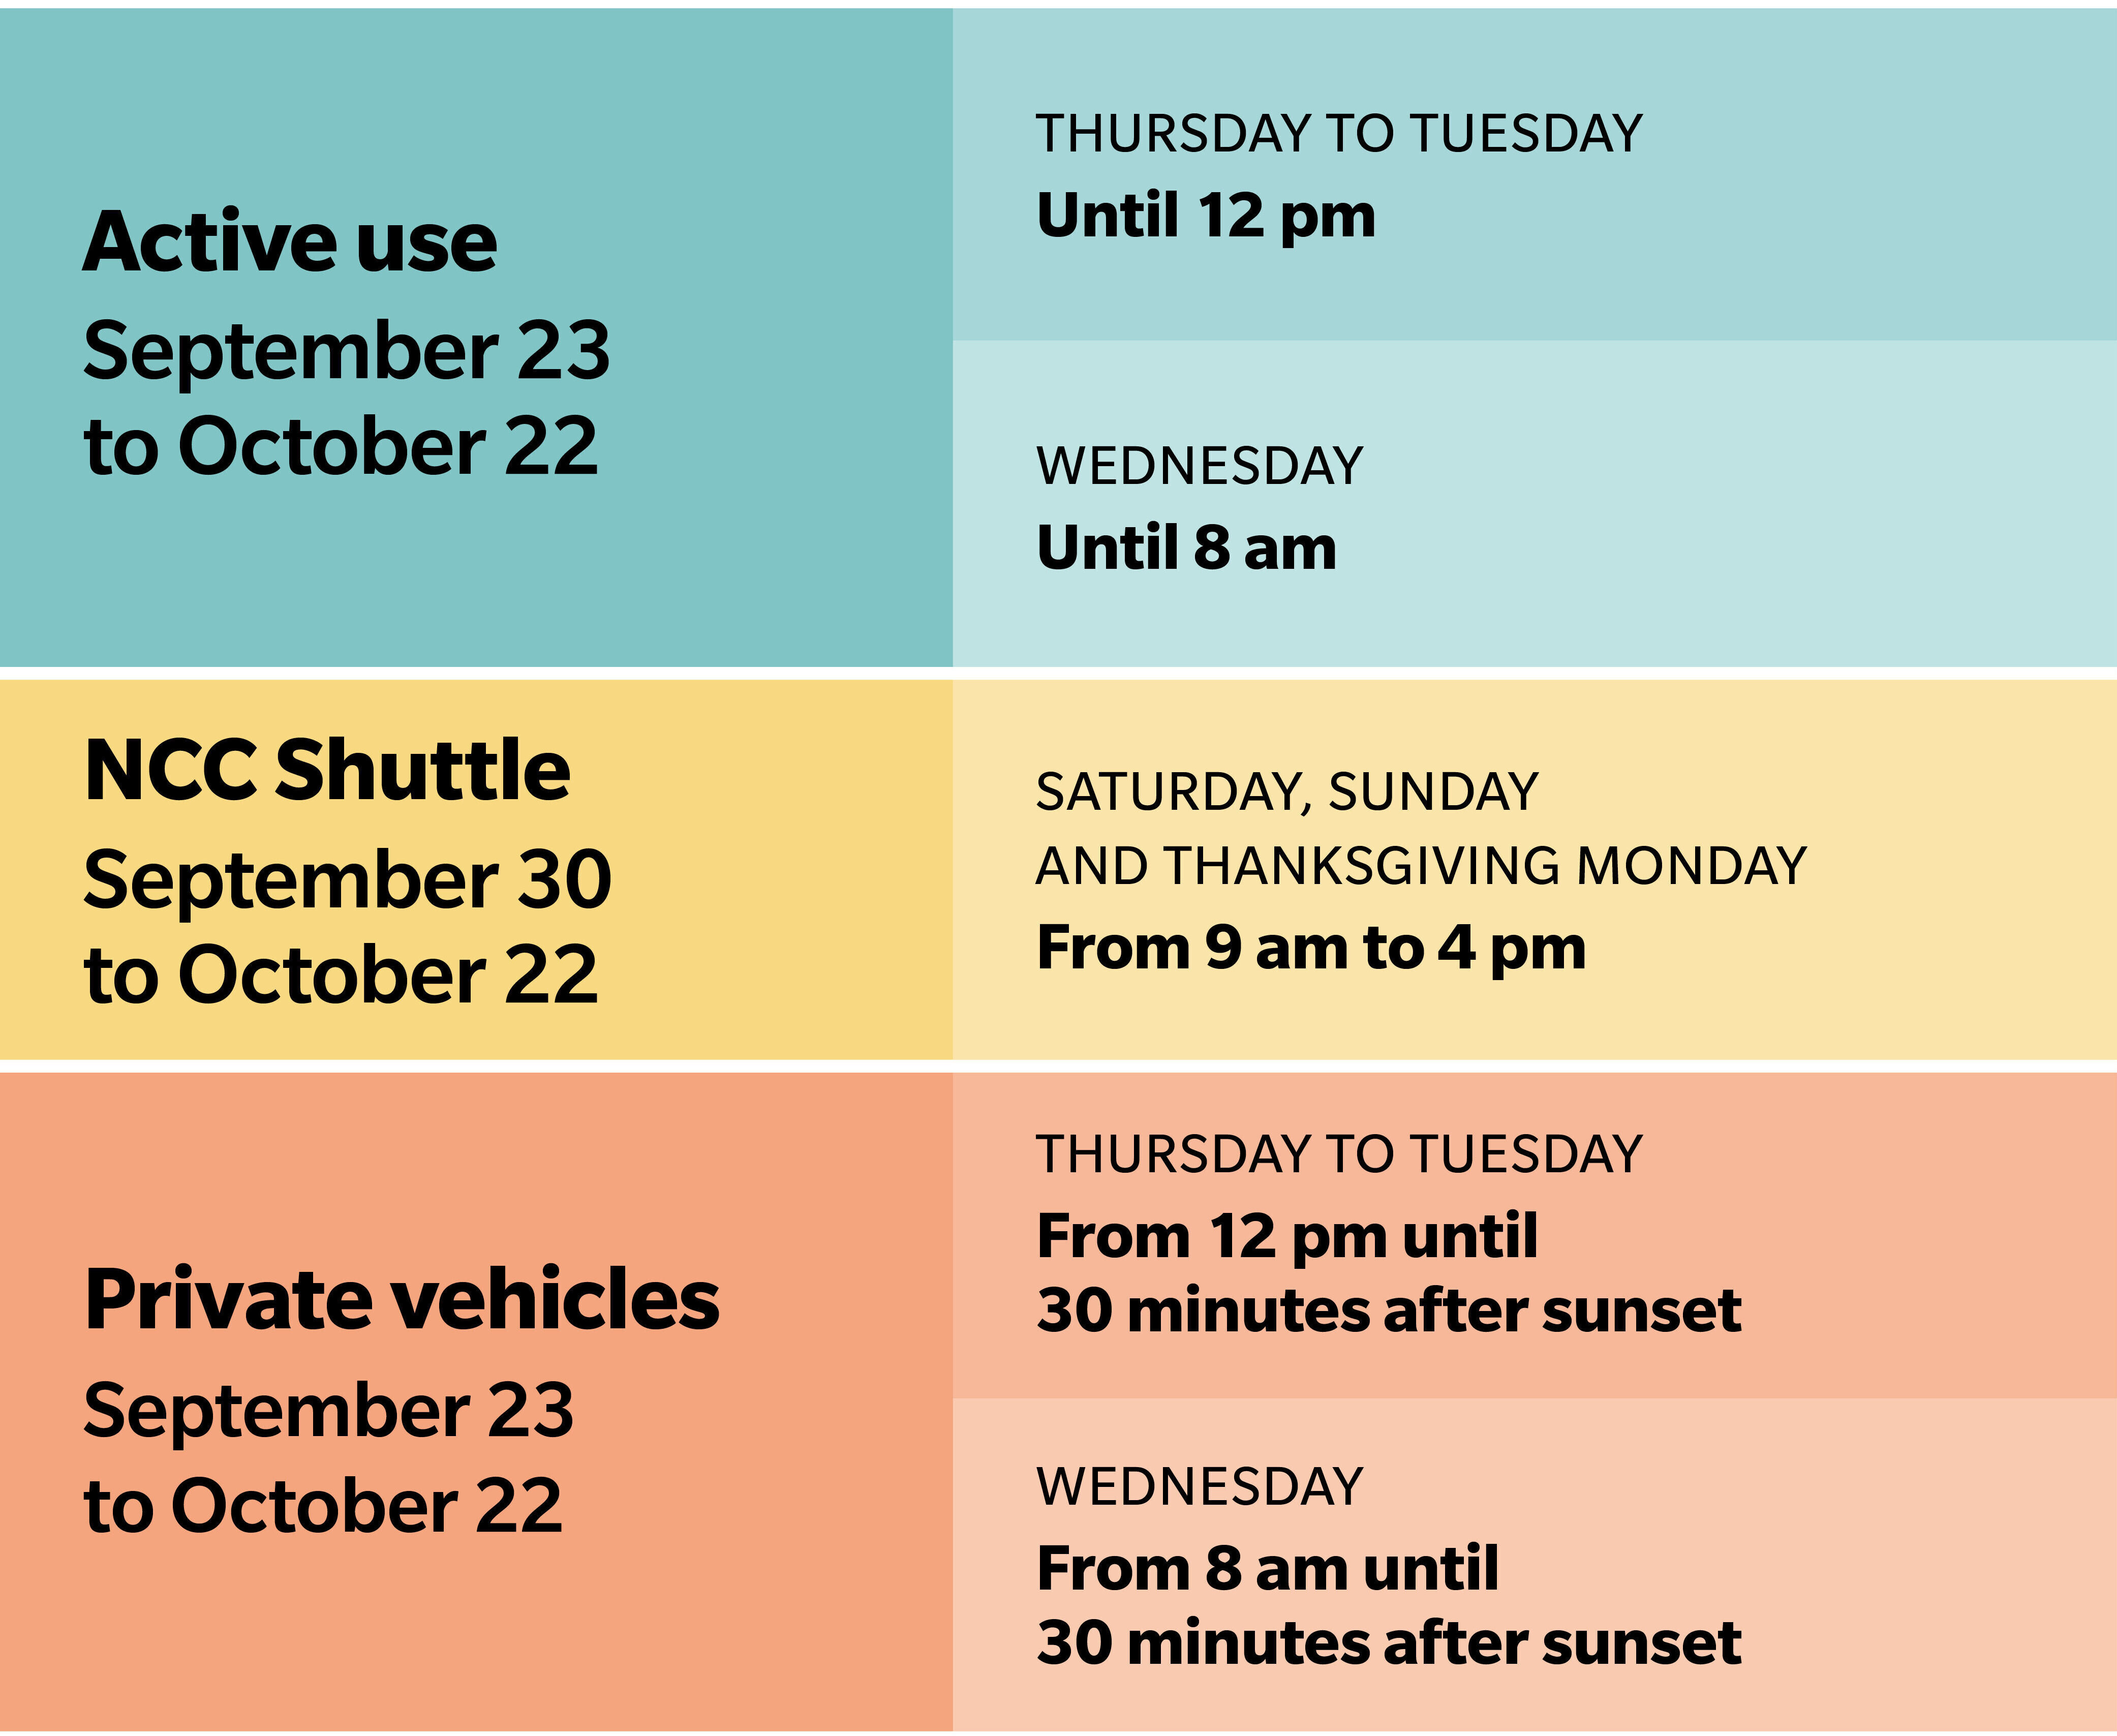 In fall, the parkways are reserved for active use every day until noon, except on Wednesdays. The parkways will be open to private vehicles every day from noon to 30 minutes after sunset and Wednesdays from 8 am to 30 minutes after sunset.